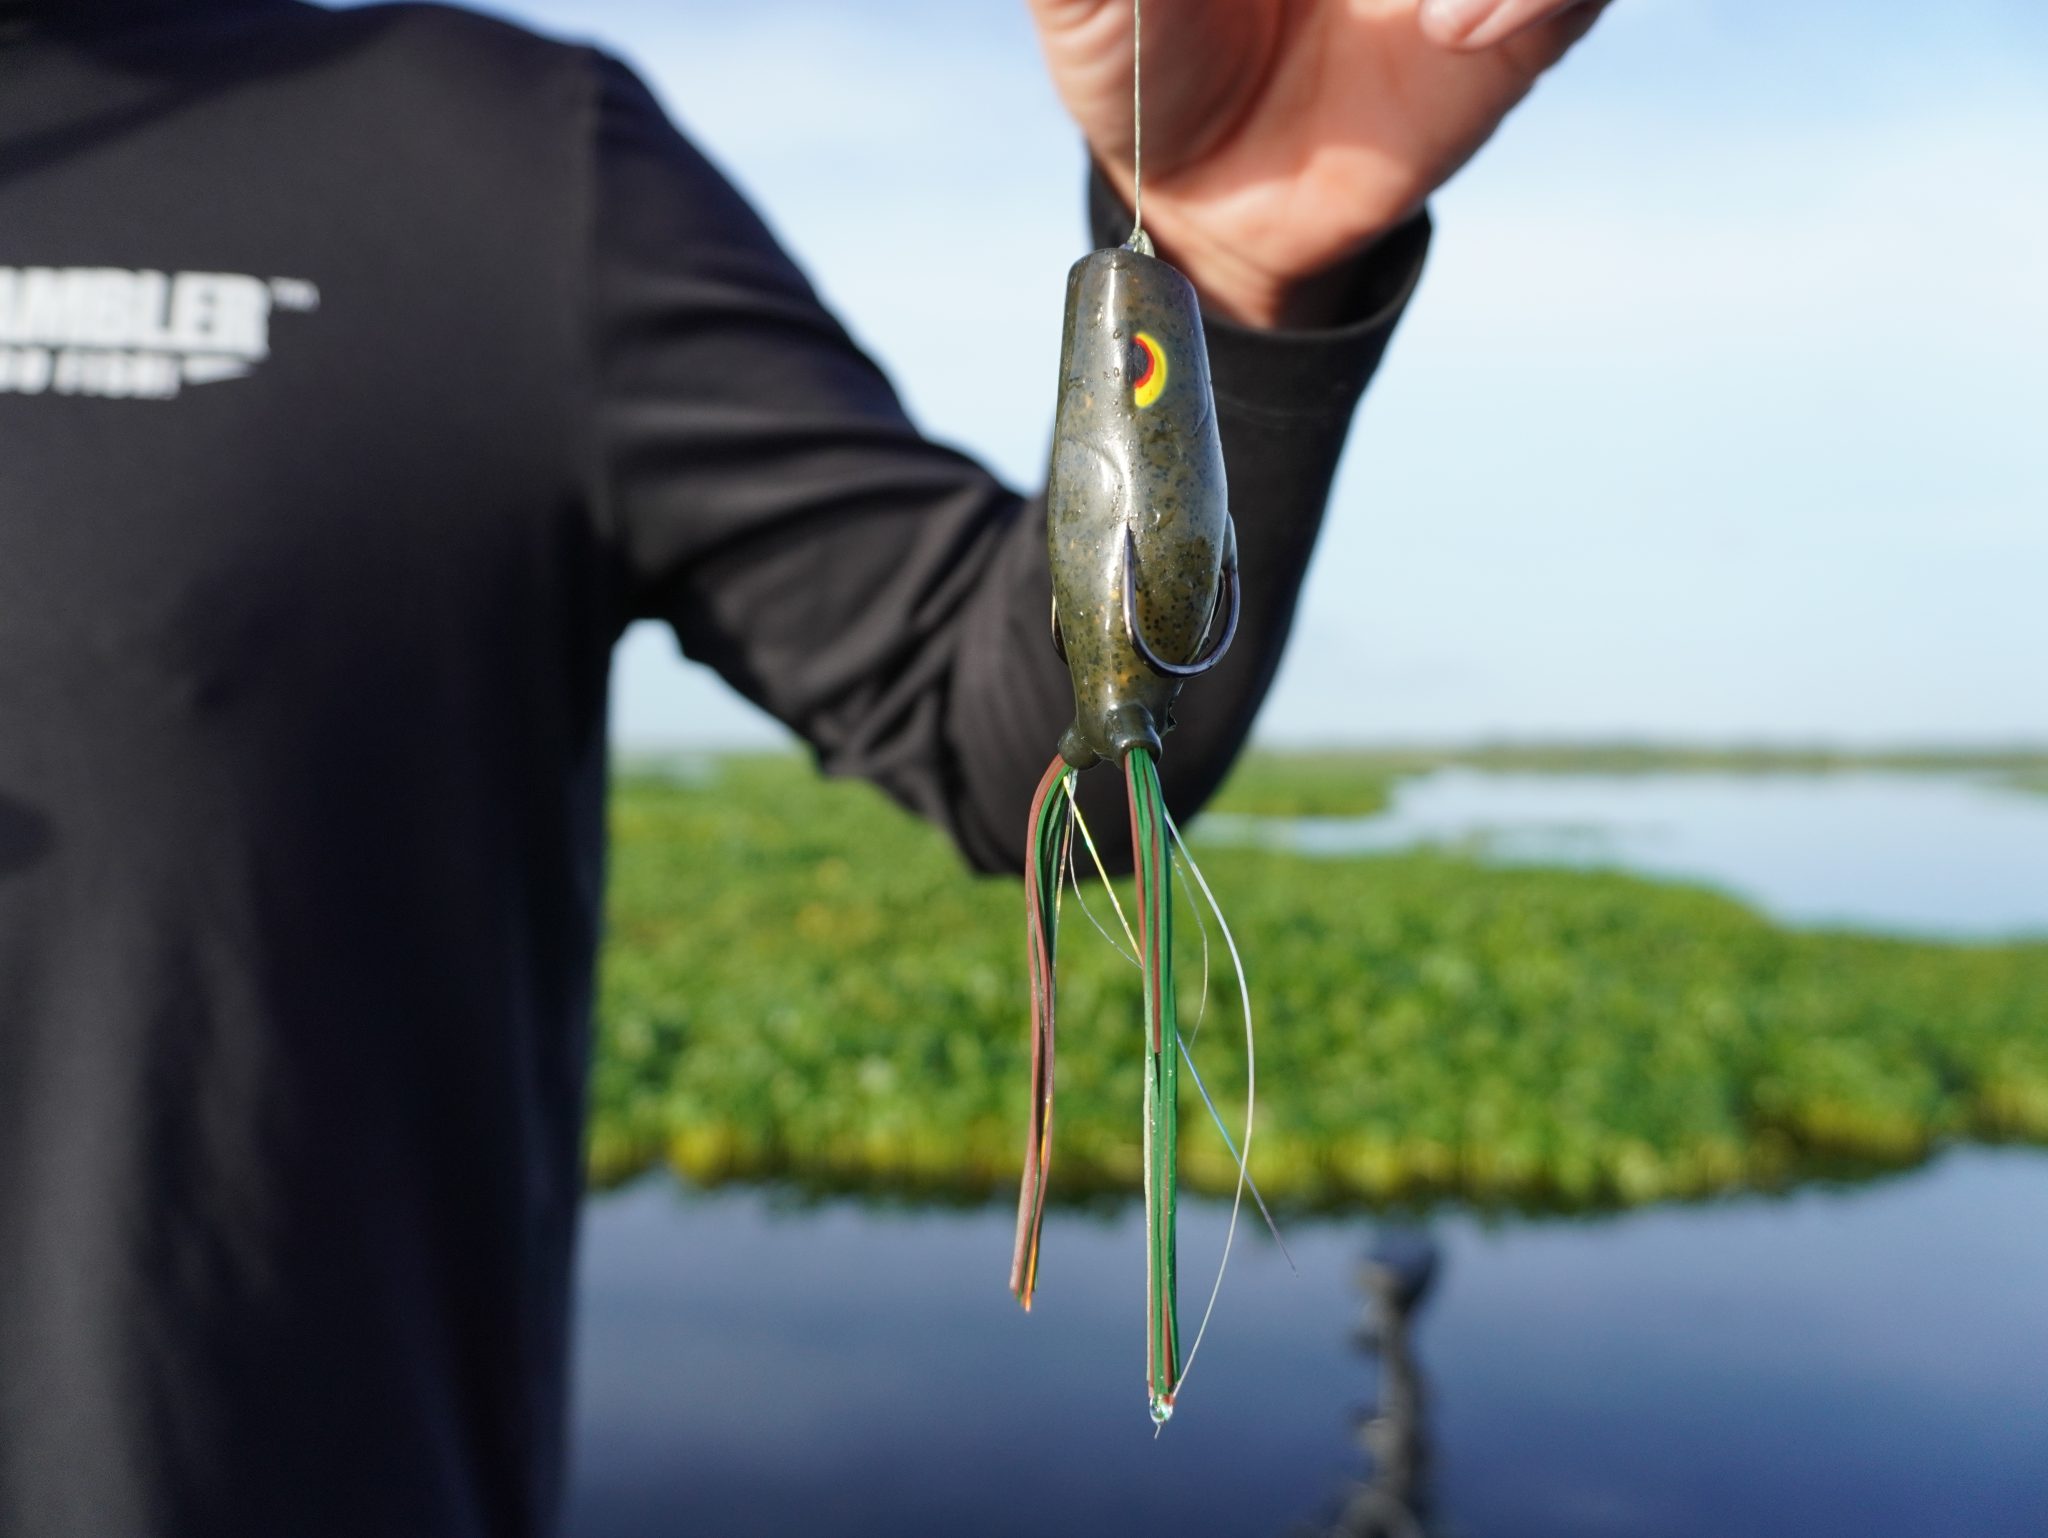 The NEW Popping Frog from Gambler Lures